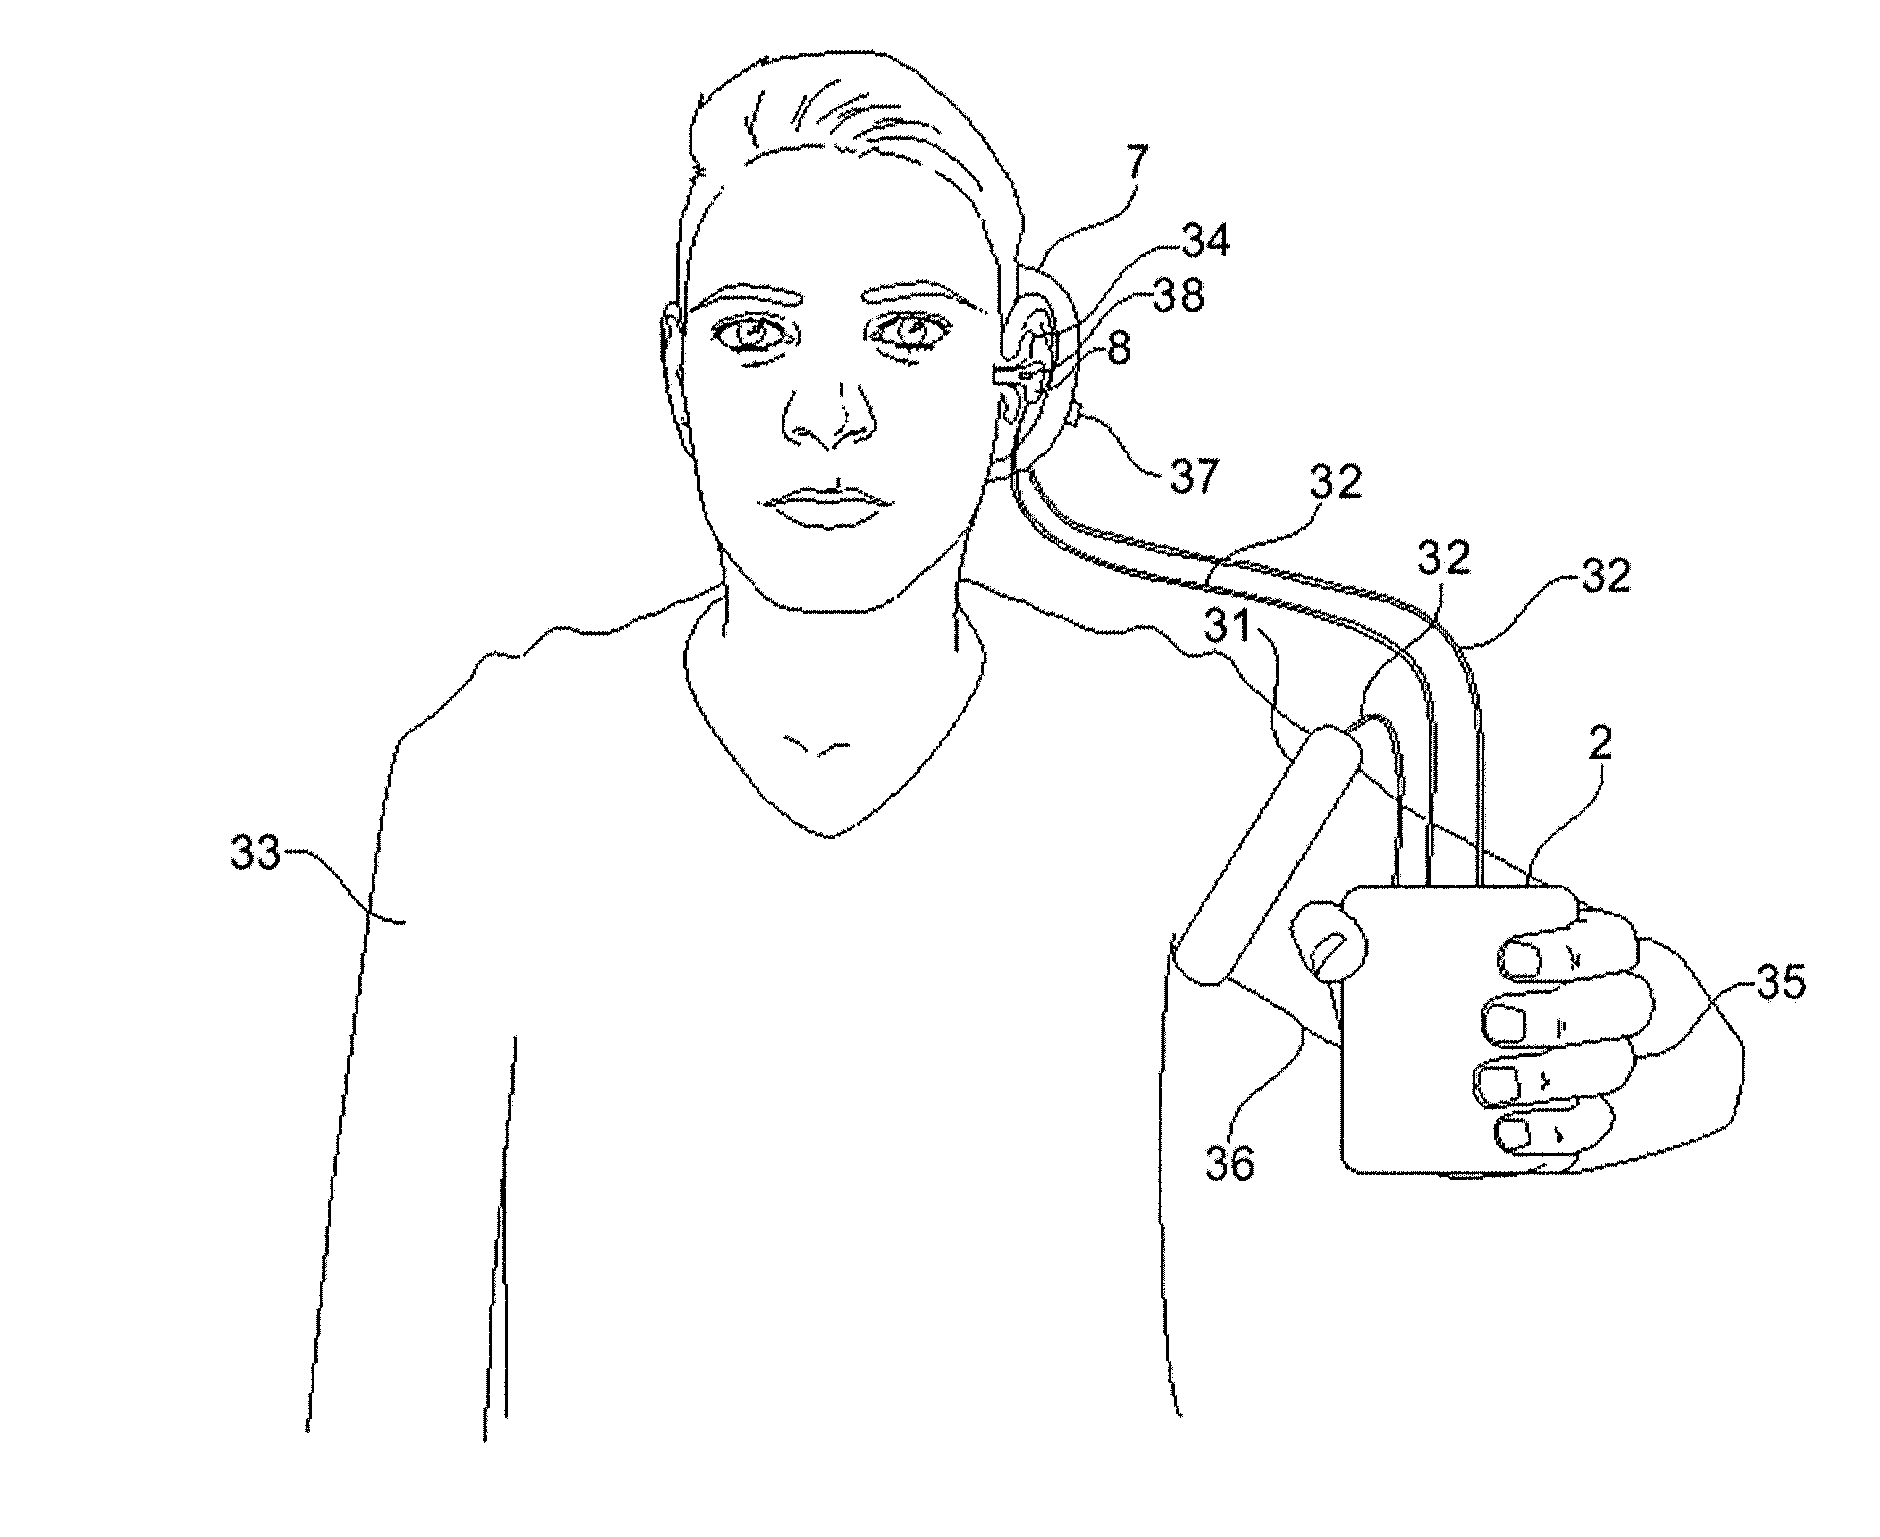 Apparatus for ascertaining a personal tinnitus frequency